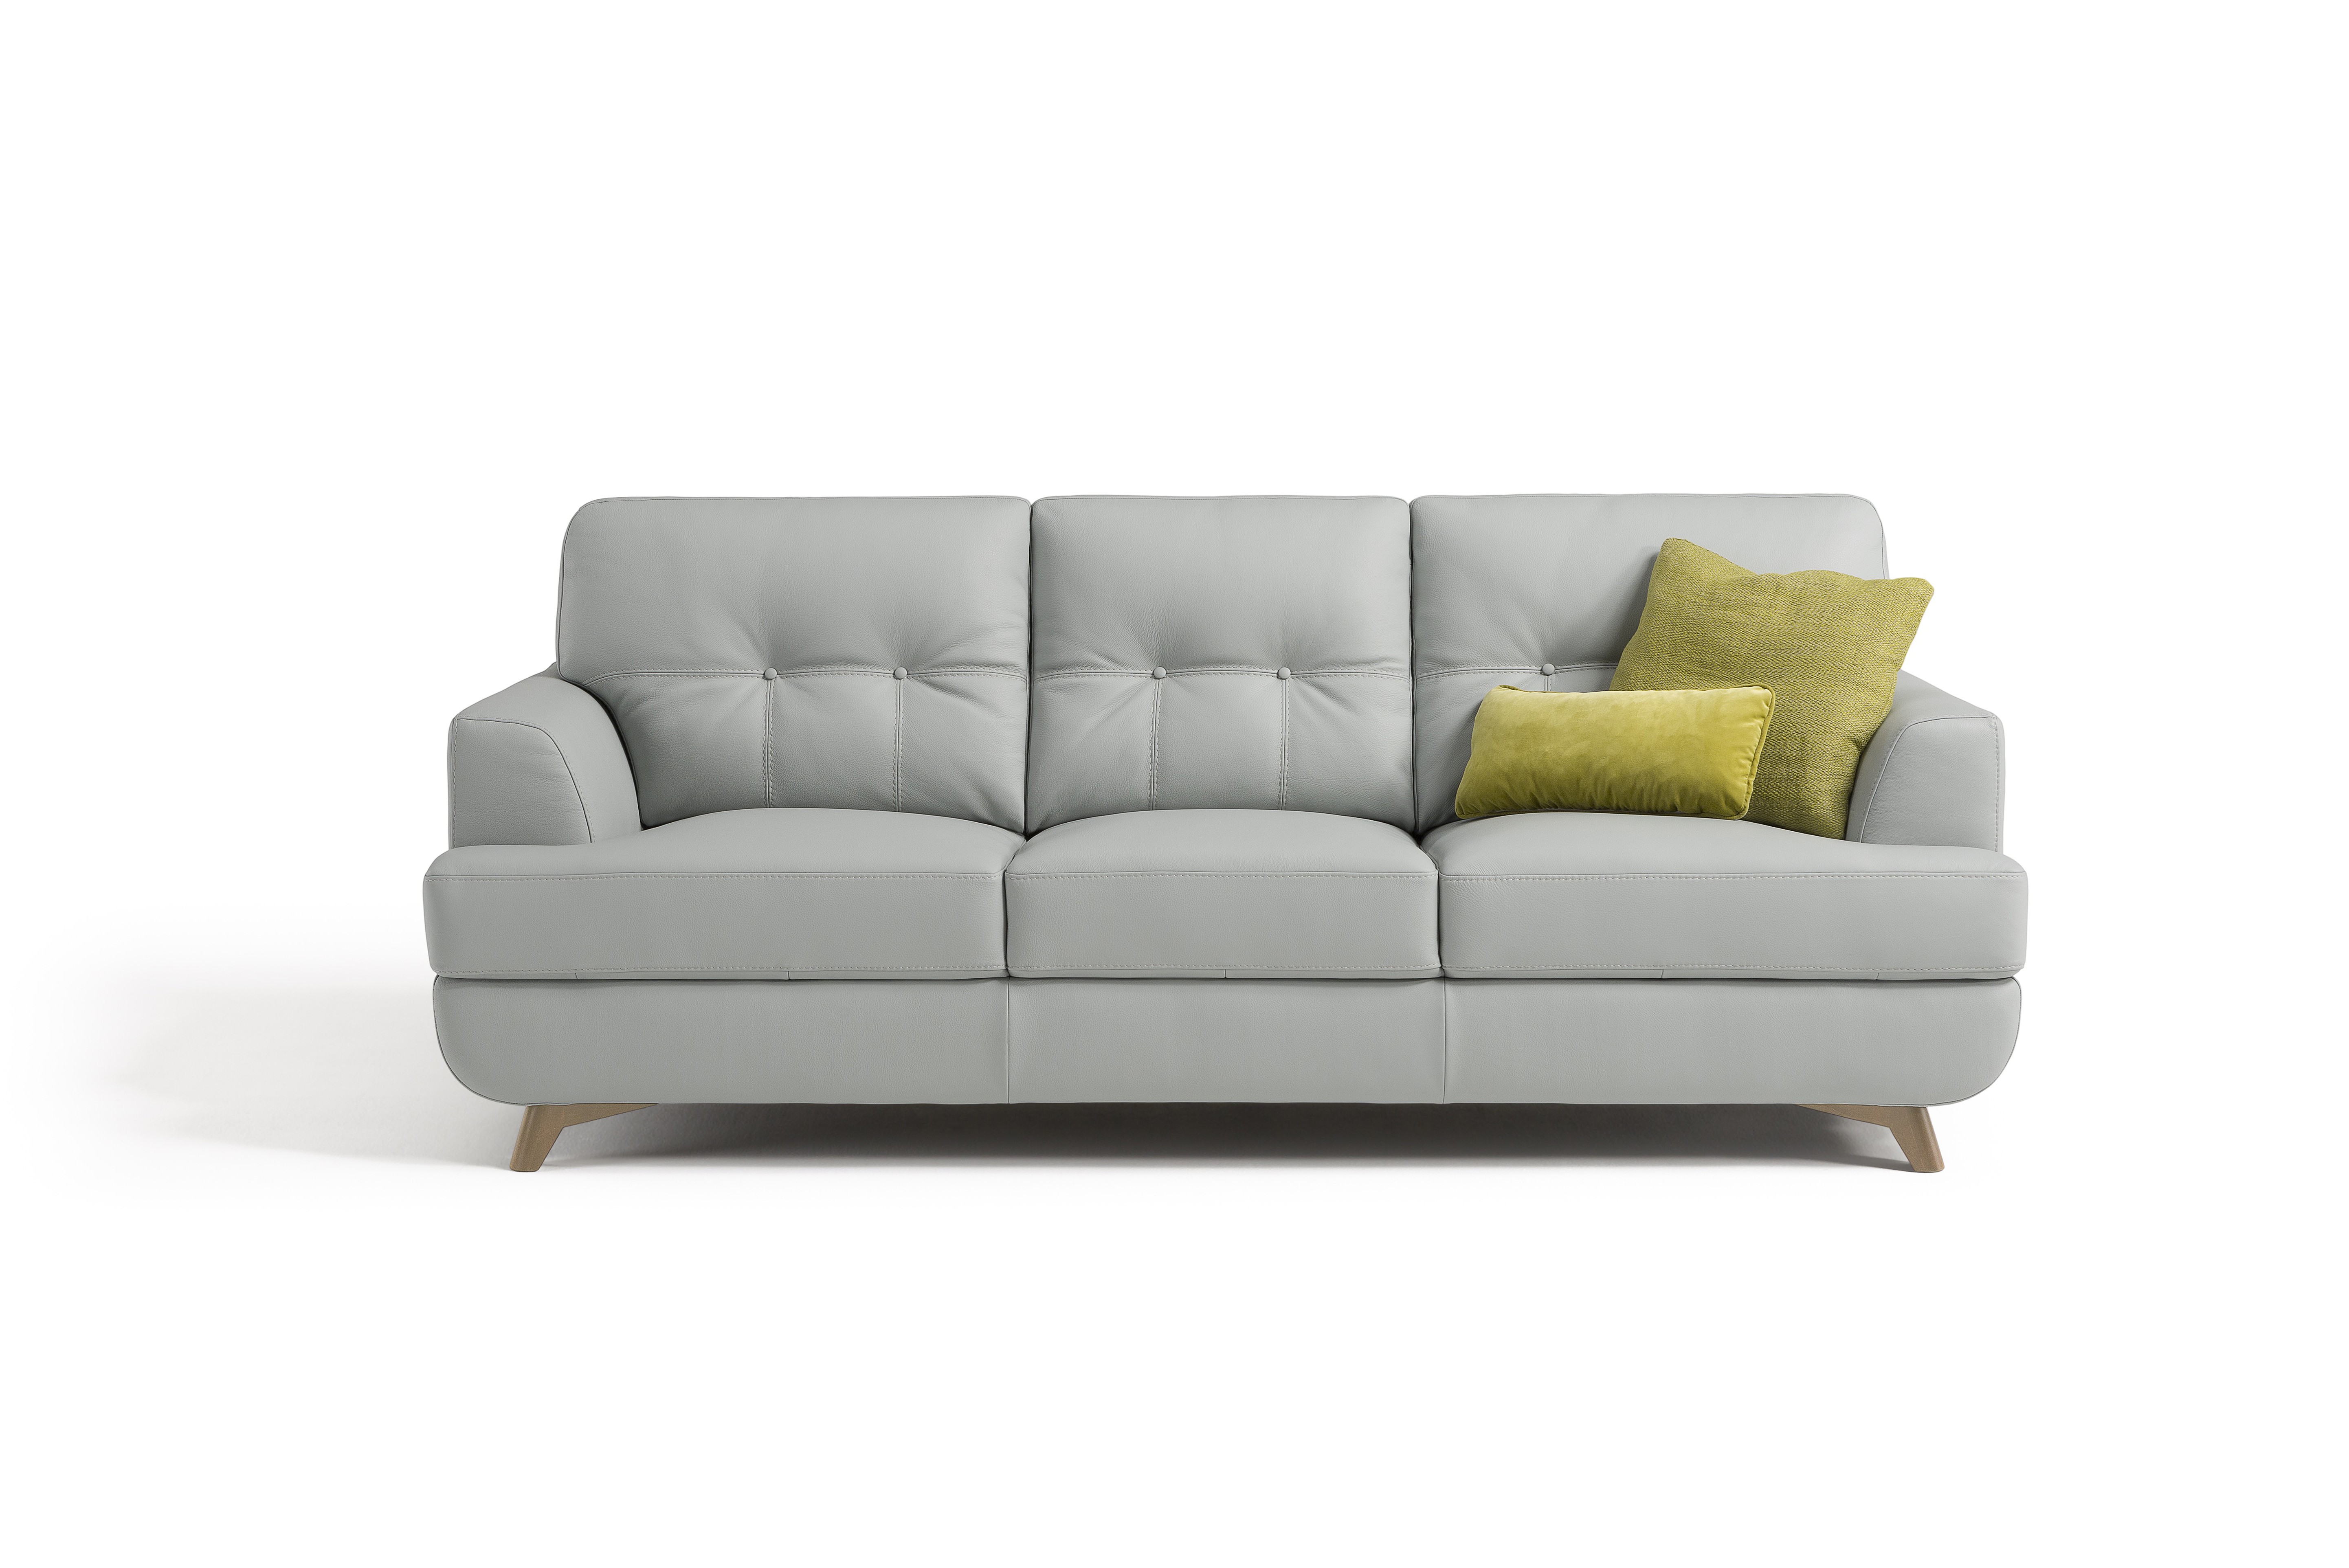 How To Improve Your House With A Microfiber Sofa